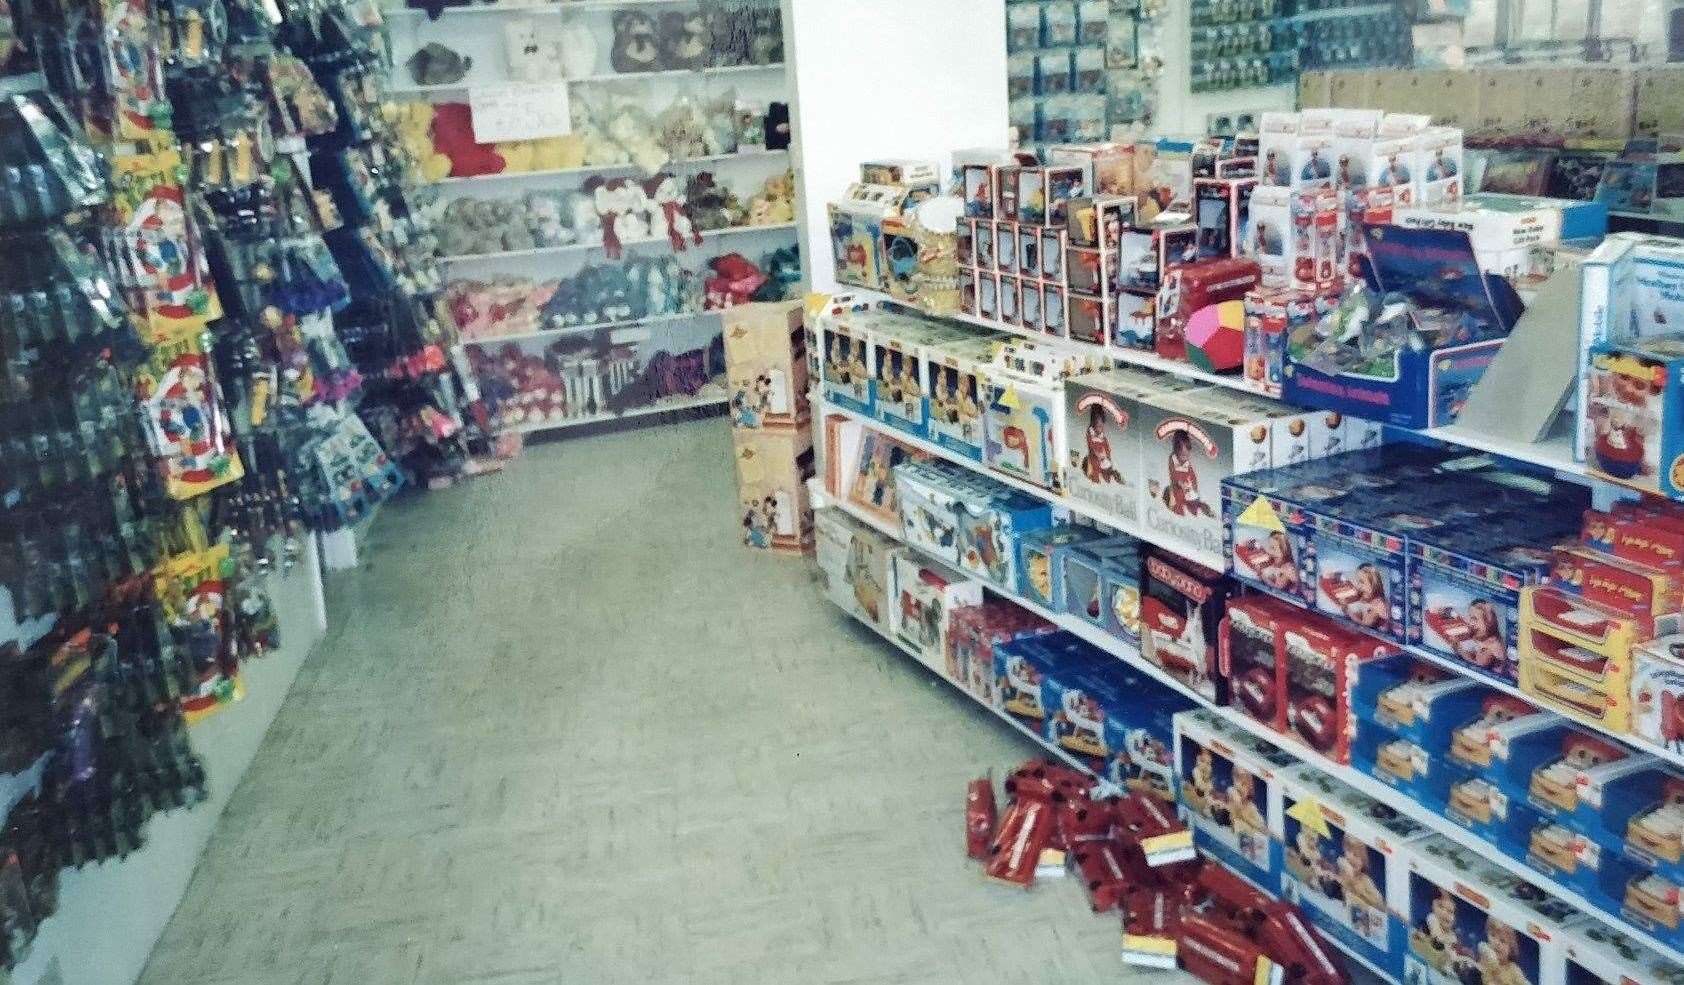 An old photo inside the store